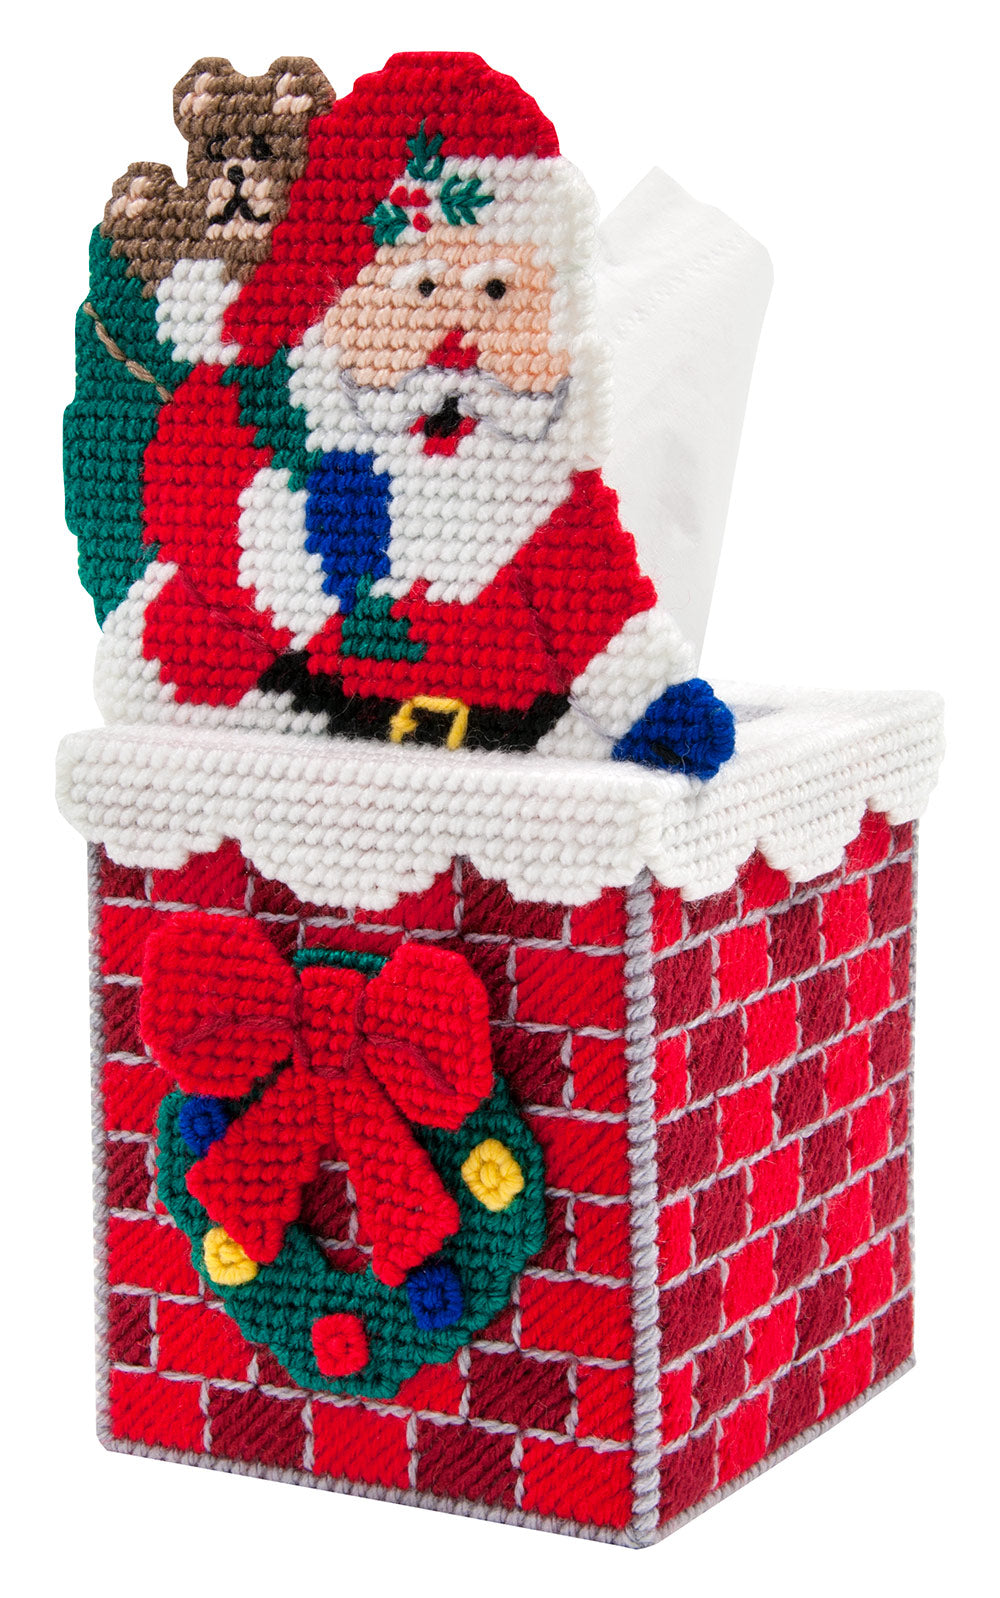 Down the Chimney Tissue Box Cover Plastic Canvas Kit